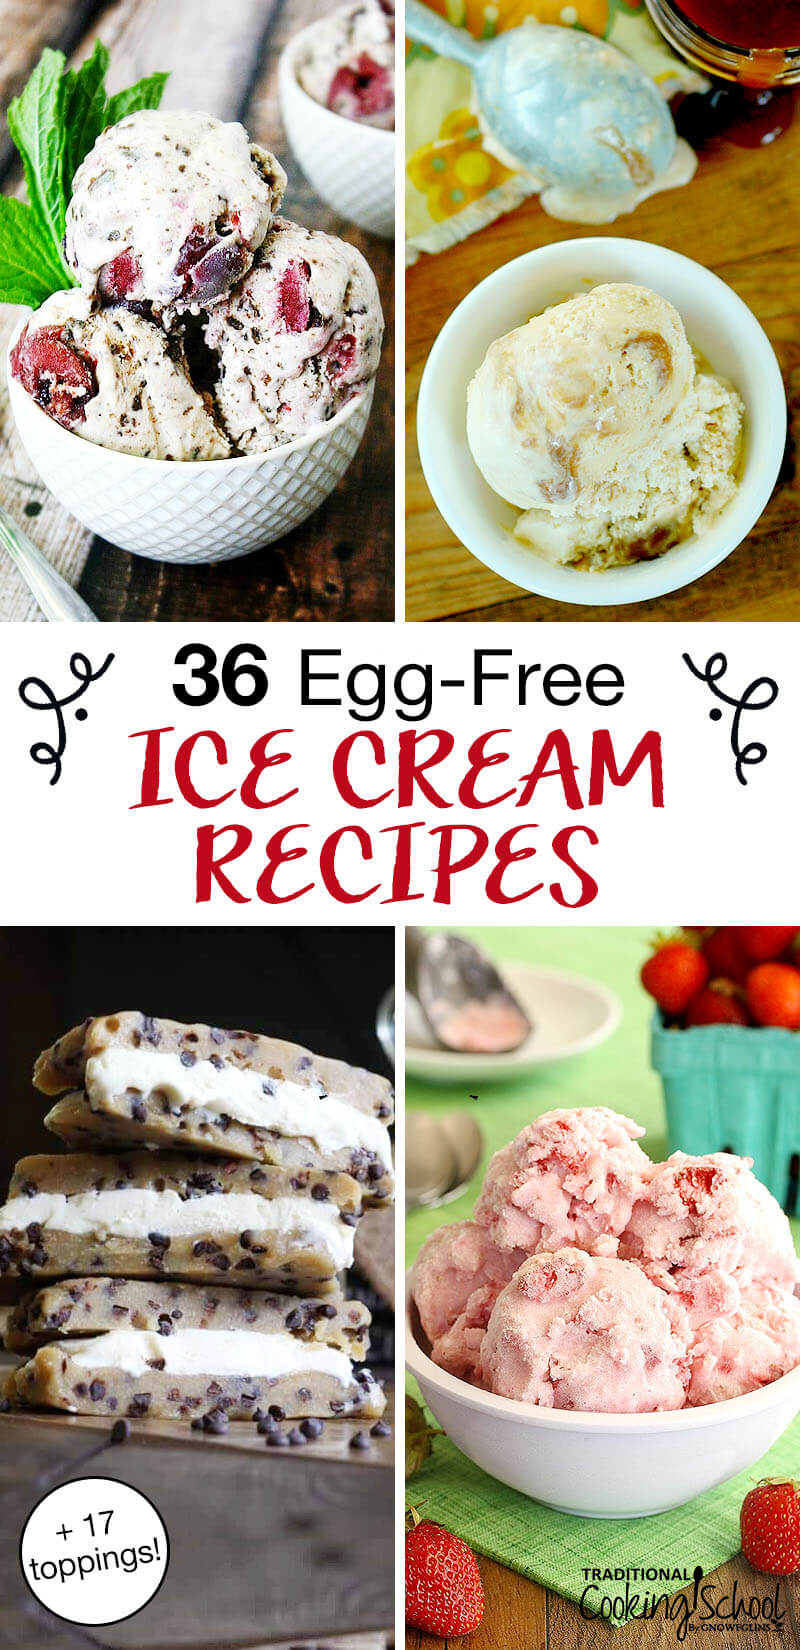 photo collage of homemade ice creams, with text overlay: "36 Egg-Free Ice Cream Recipes (+17 toppings!)"